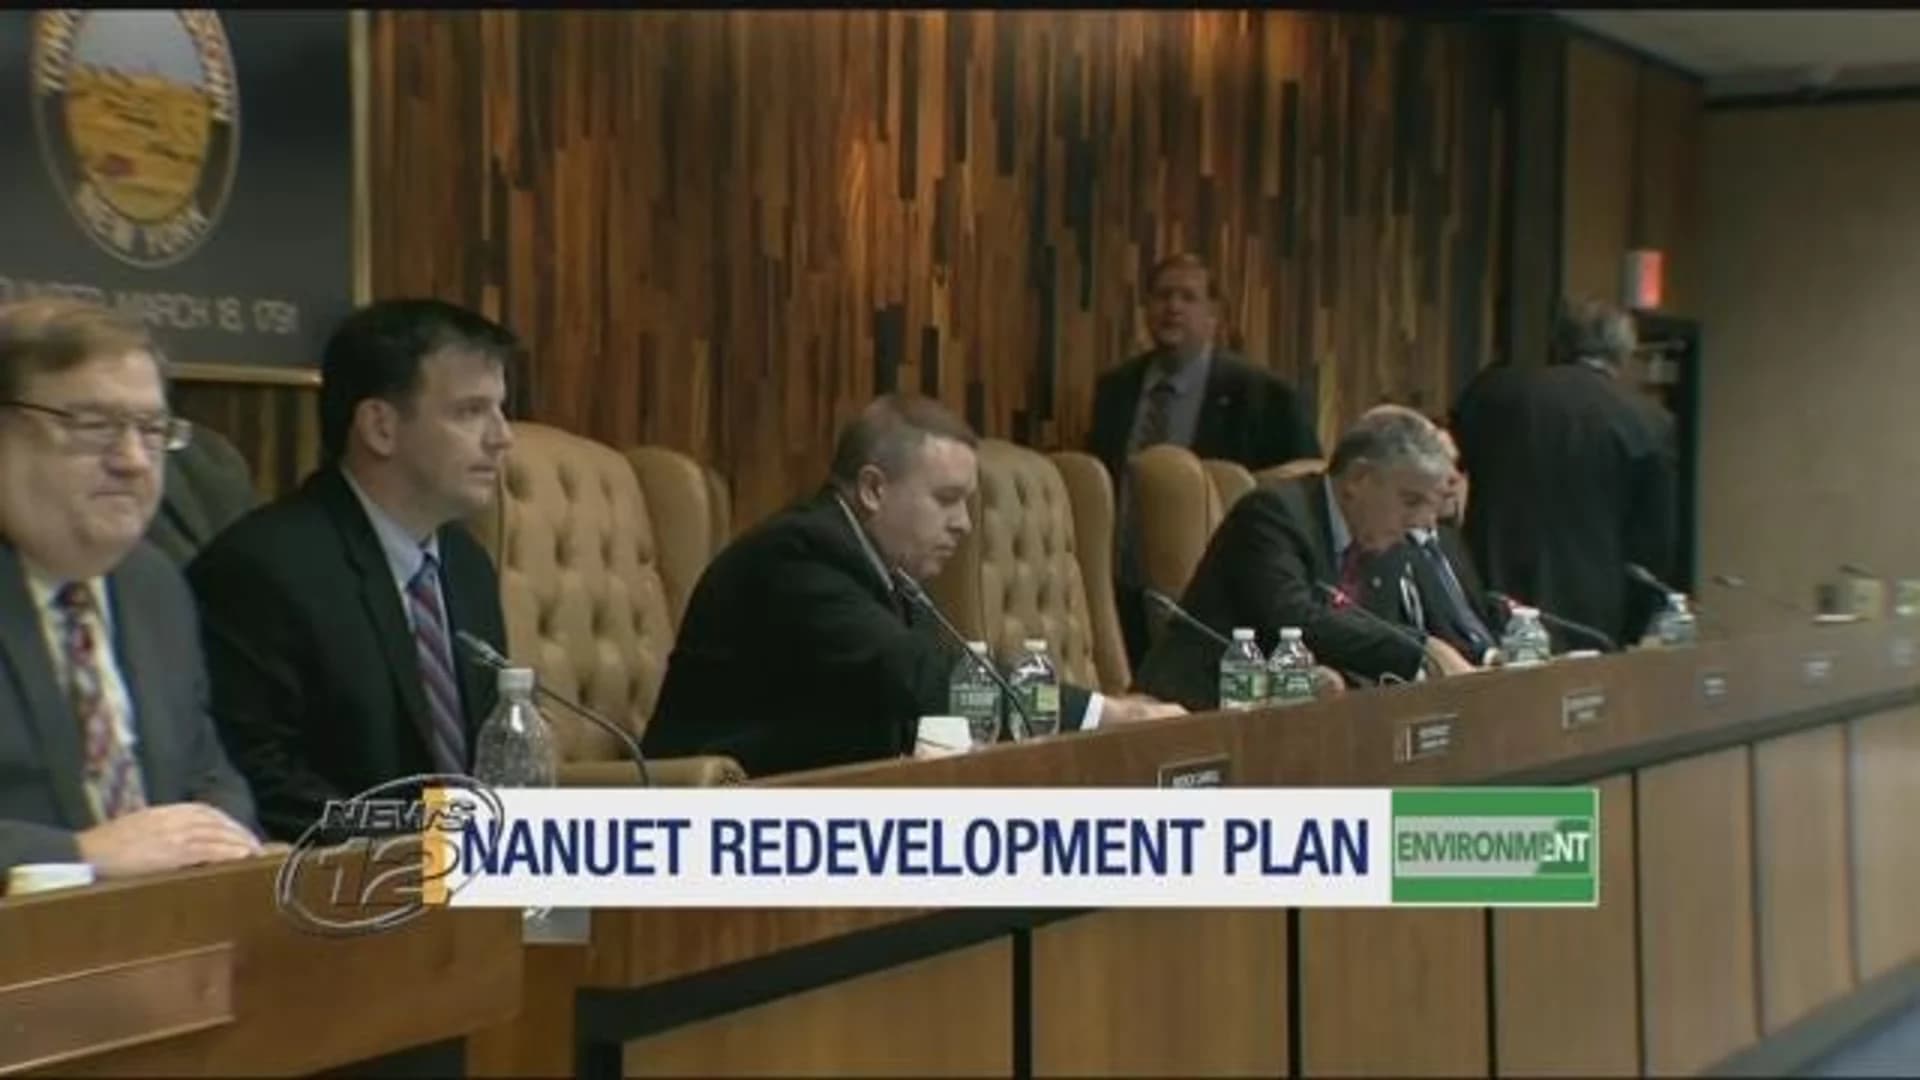 Plan aims to attract more millennials, young families to Nanuet